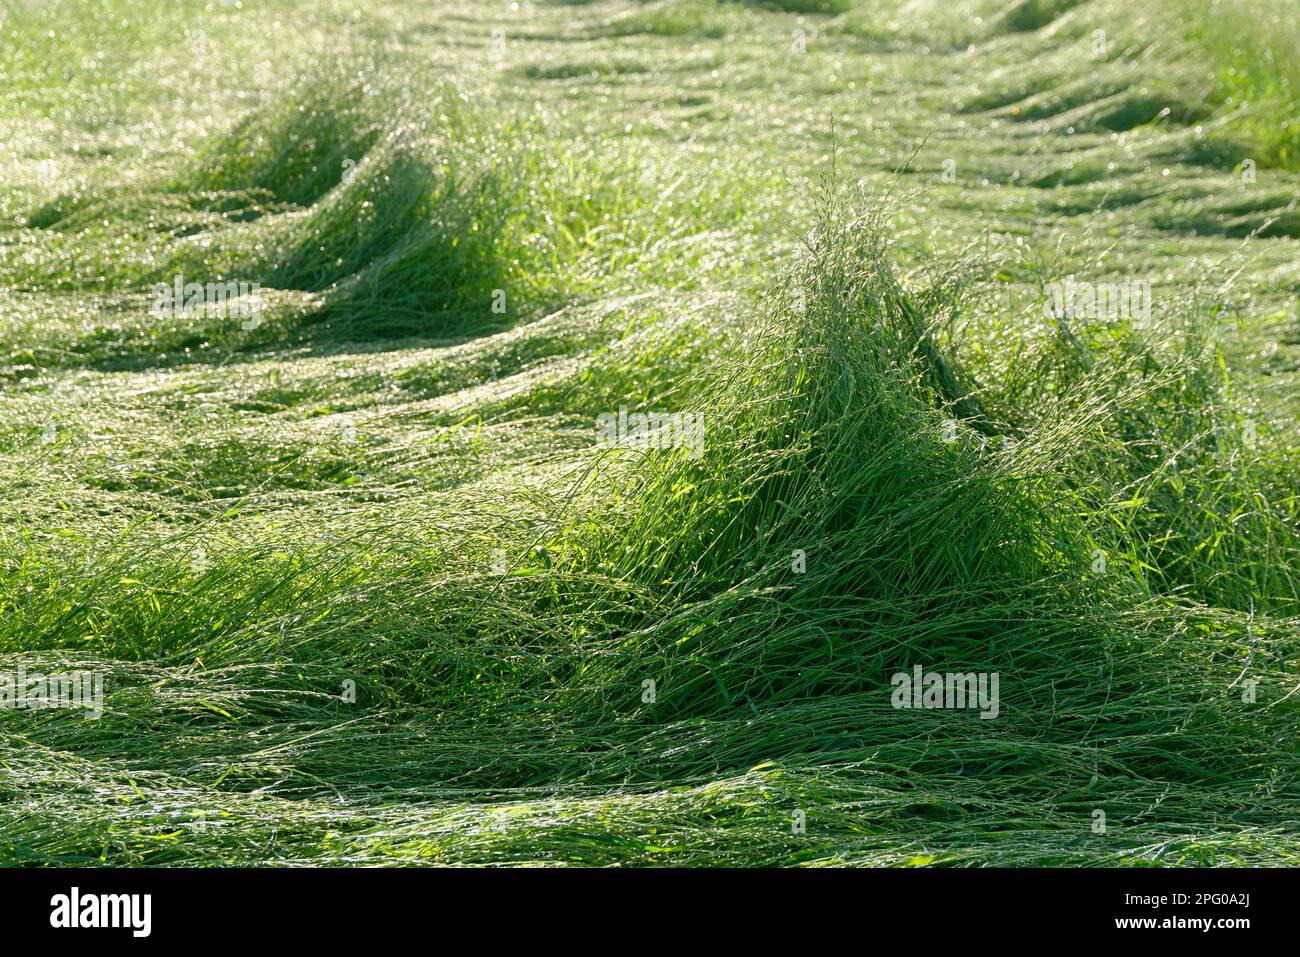 Field with perennial ryegrass (Lolium perenne) after storm, St.Hubert, Kempen, NRW, Germany Stock Photo